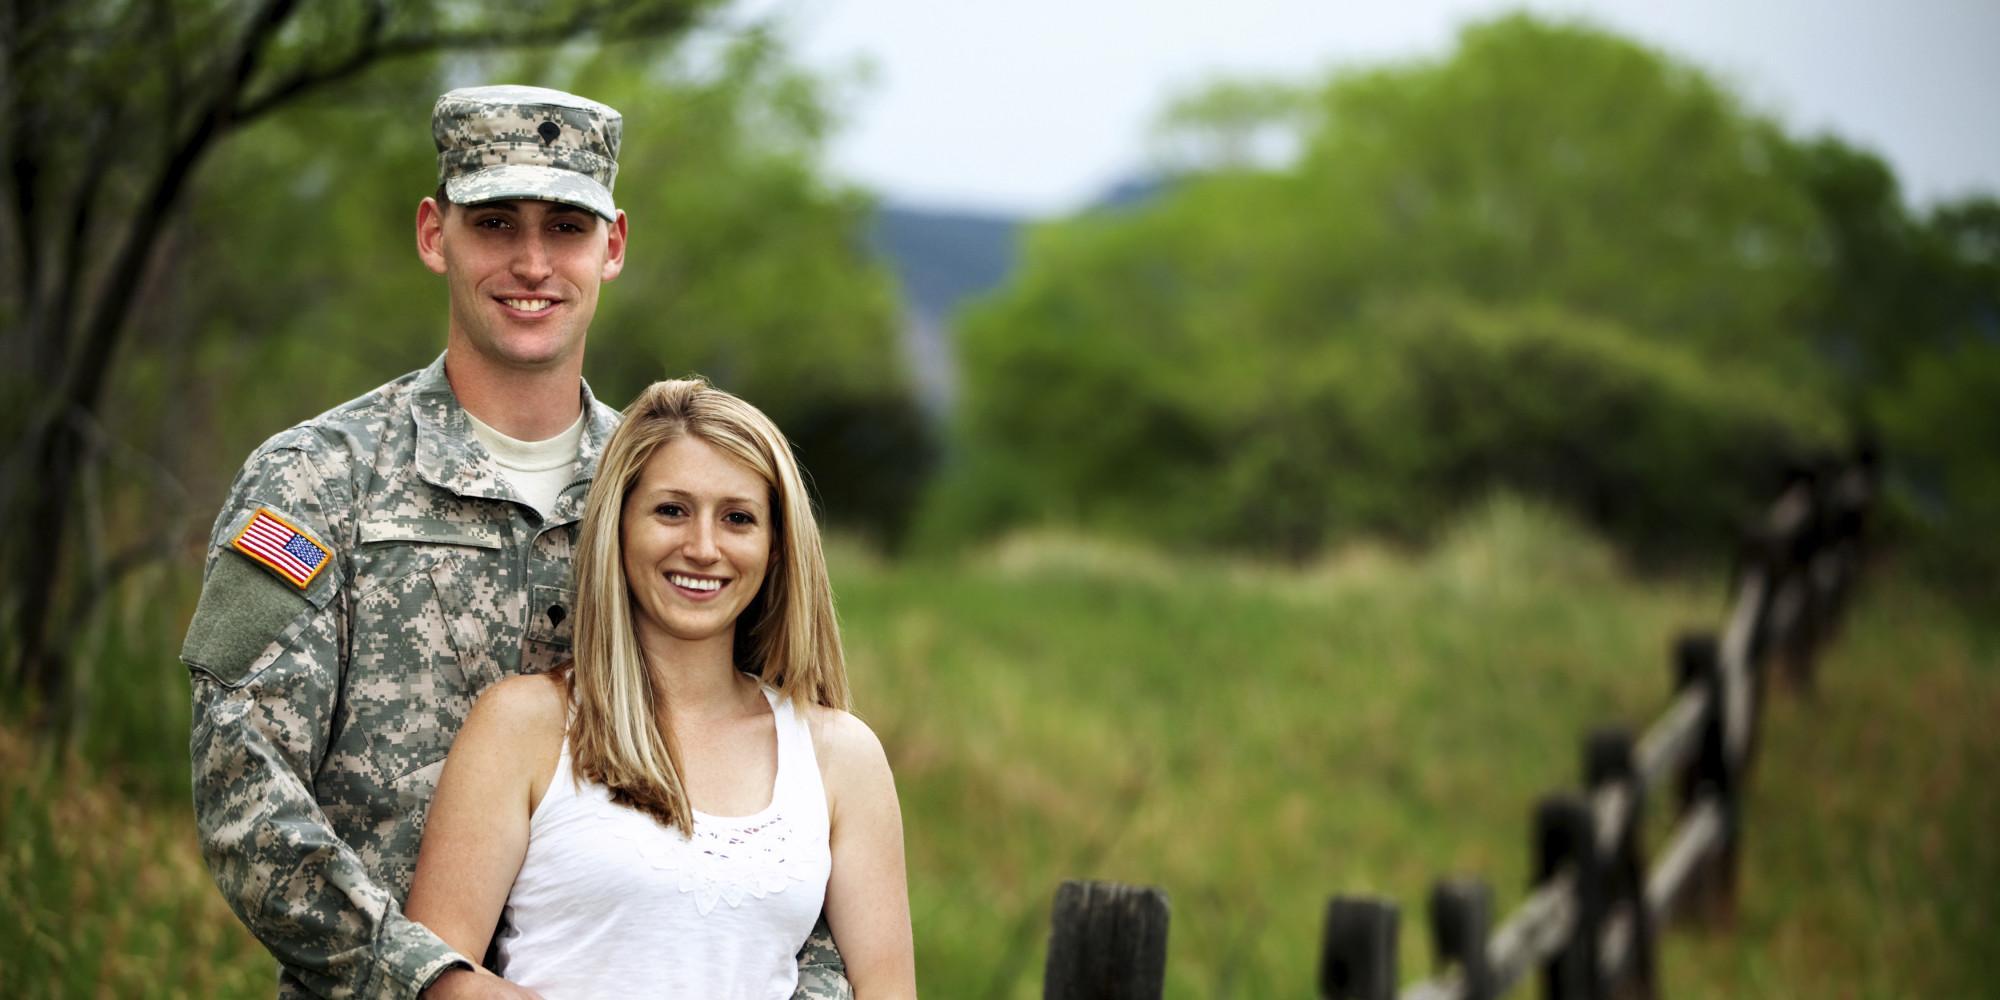 Getting Married while in the Army